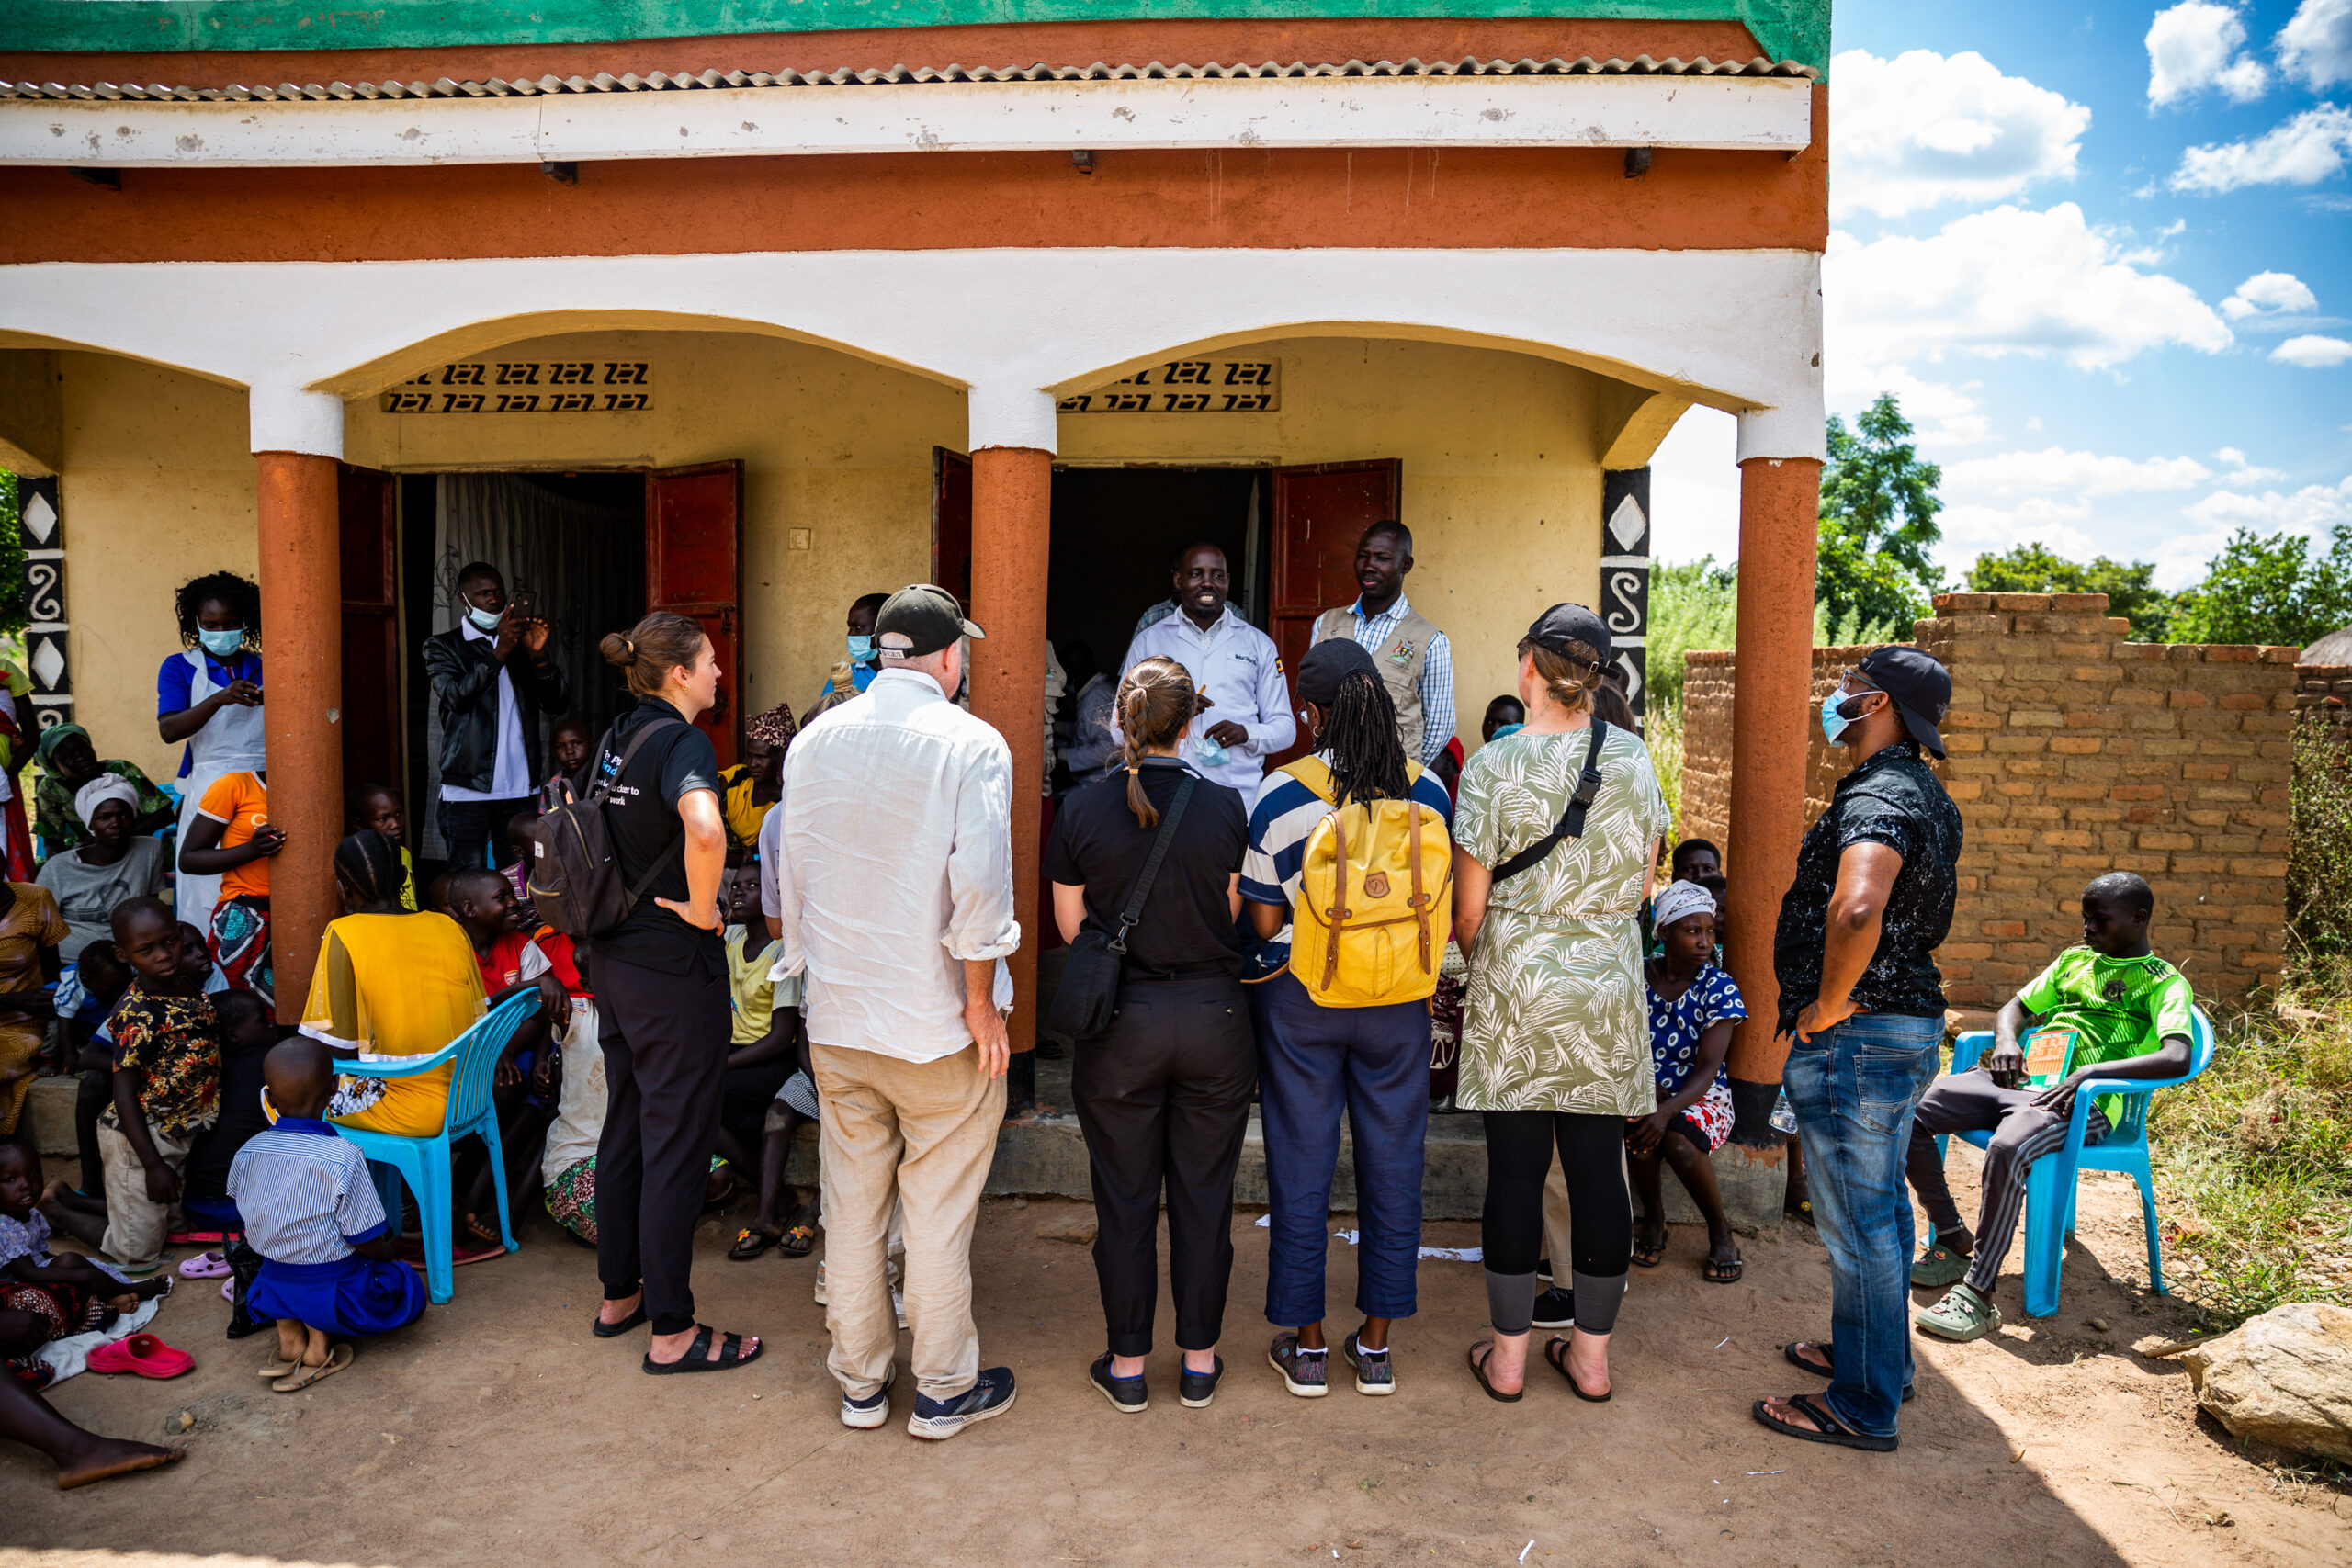 Amref USA staff learning about the clinic! Here you can see the two rooms in full view! Photo Credit: Ambrose Watanda.